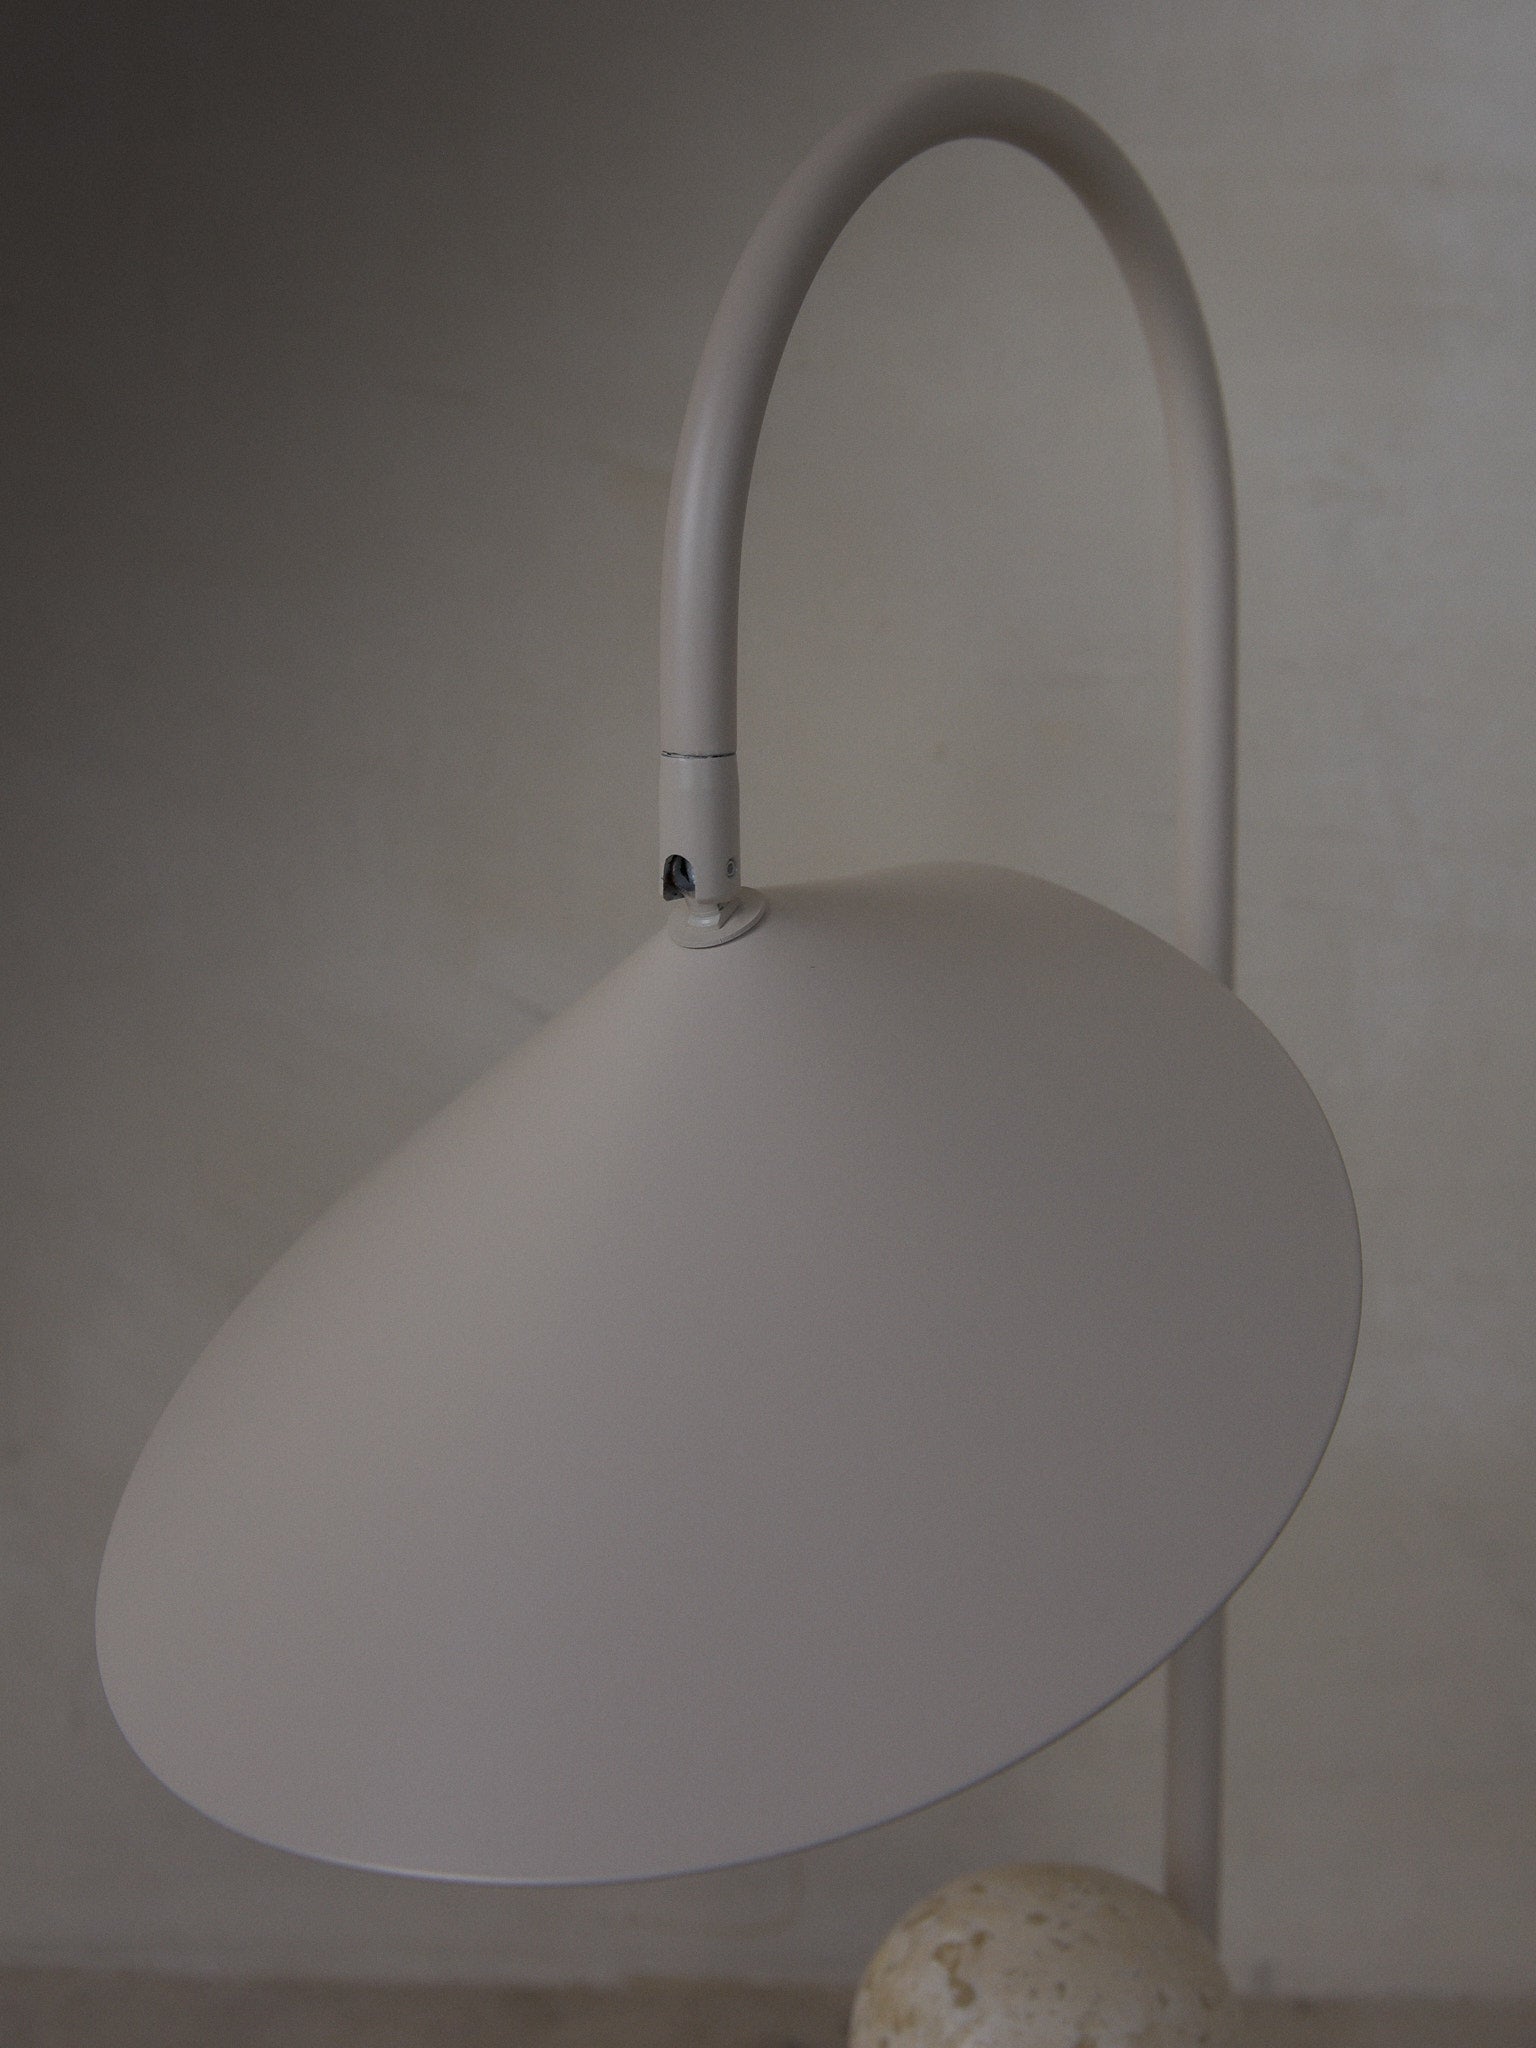 Arum Table Lamp. Statuesque, organically shaped table lamp with a beige travertine base and petal-like shade suspended from a curved metal arch. 